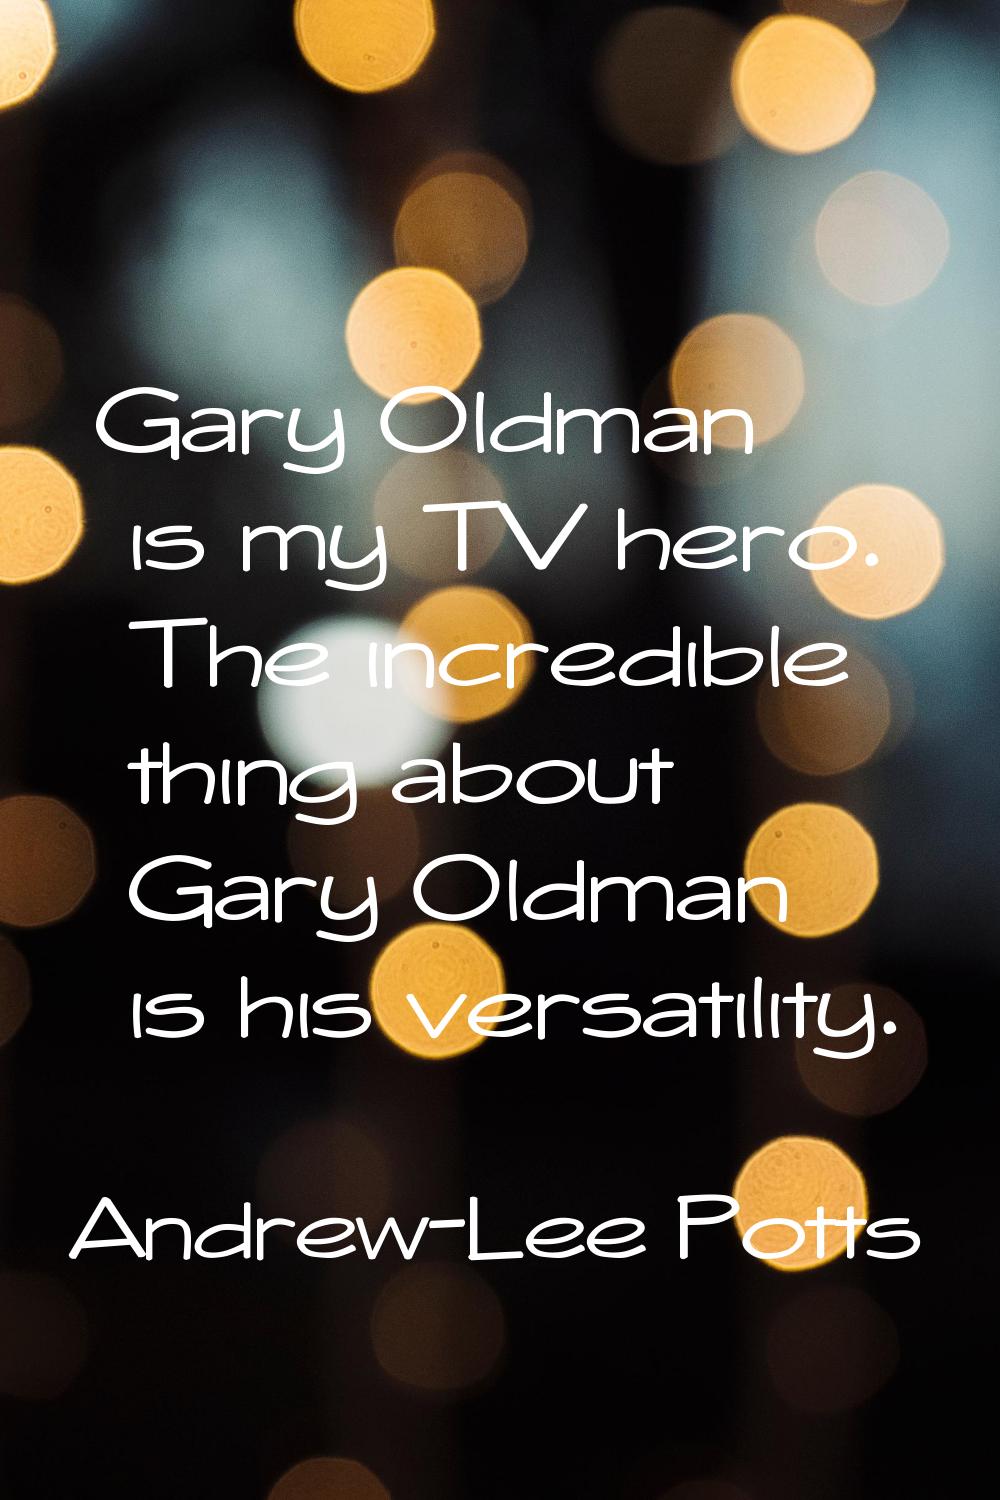 Gary Oldman is my TV hero. The incredible thing about Gary Oldman is his versatility.